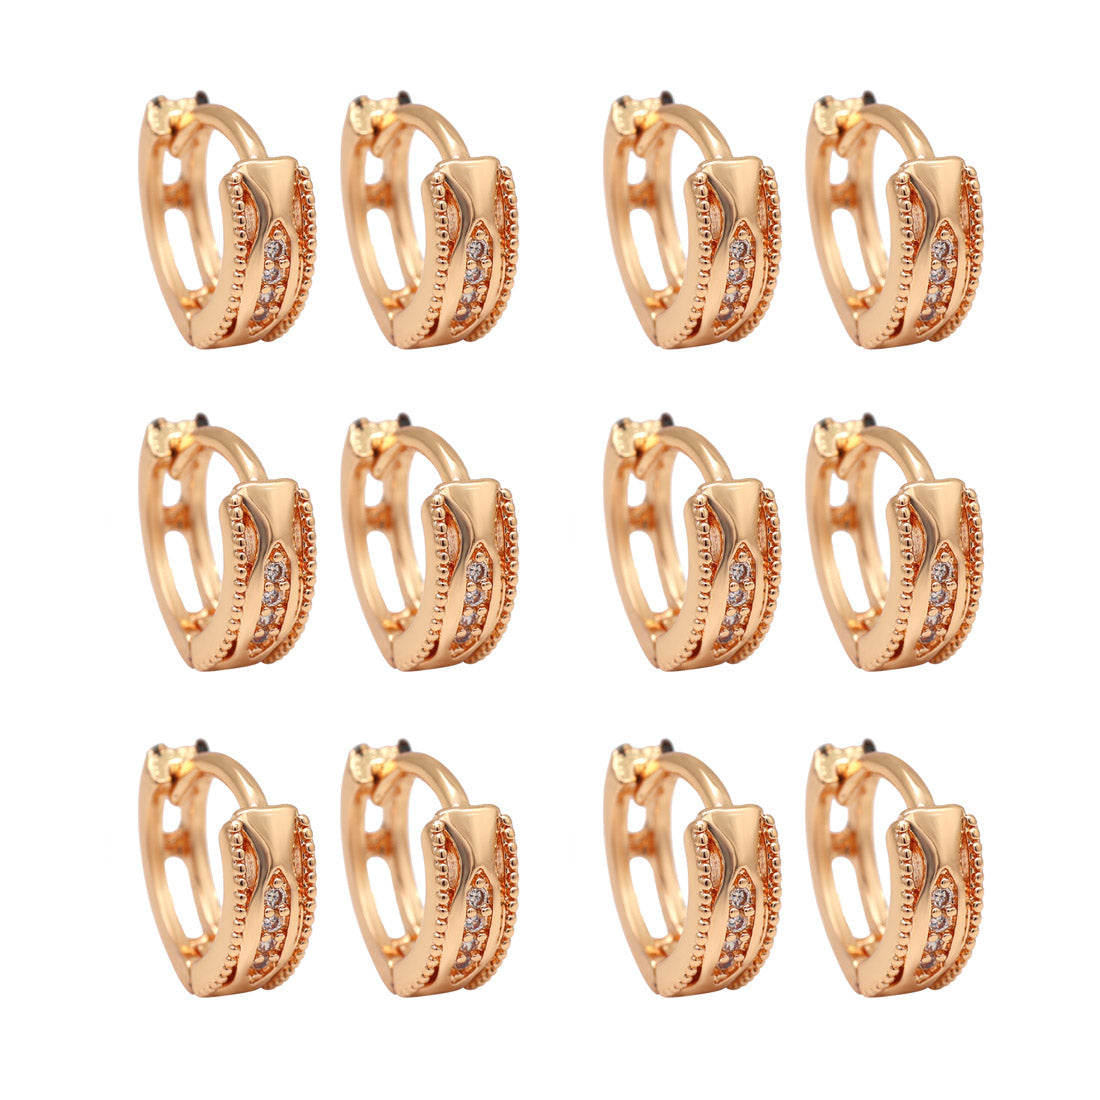 Gold Color Antique Gold Plated Earrings Combo Of 6 Pairs (ANTE528CMB) Jewellery GetGlit   